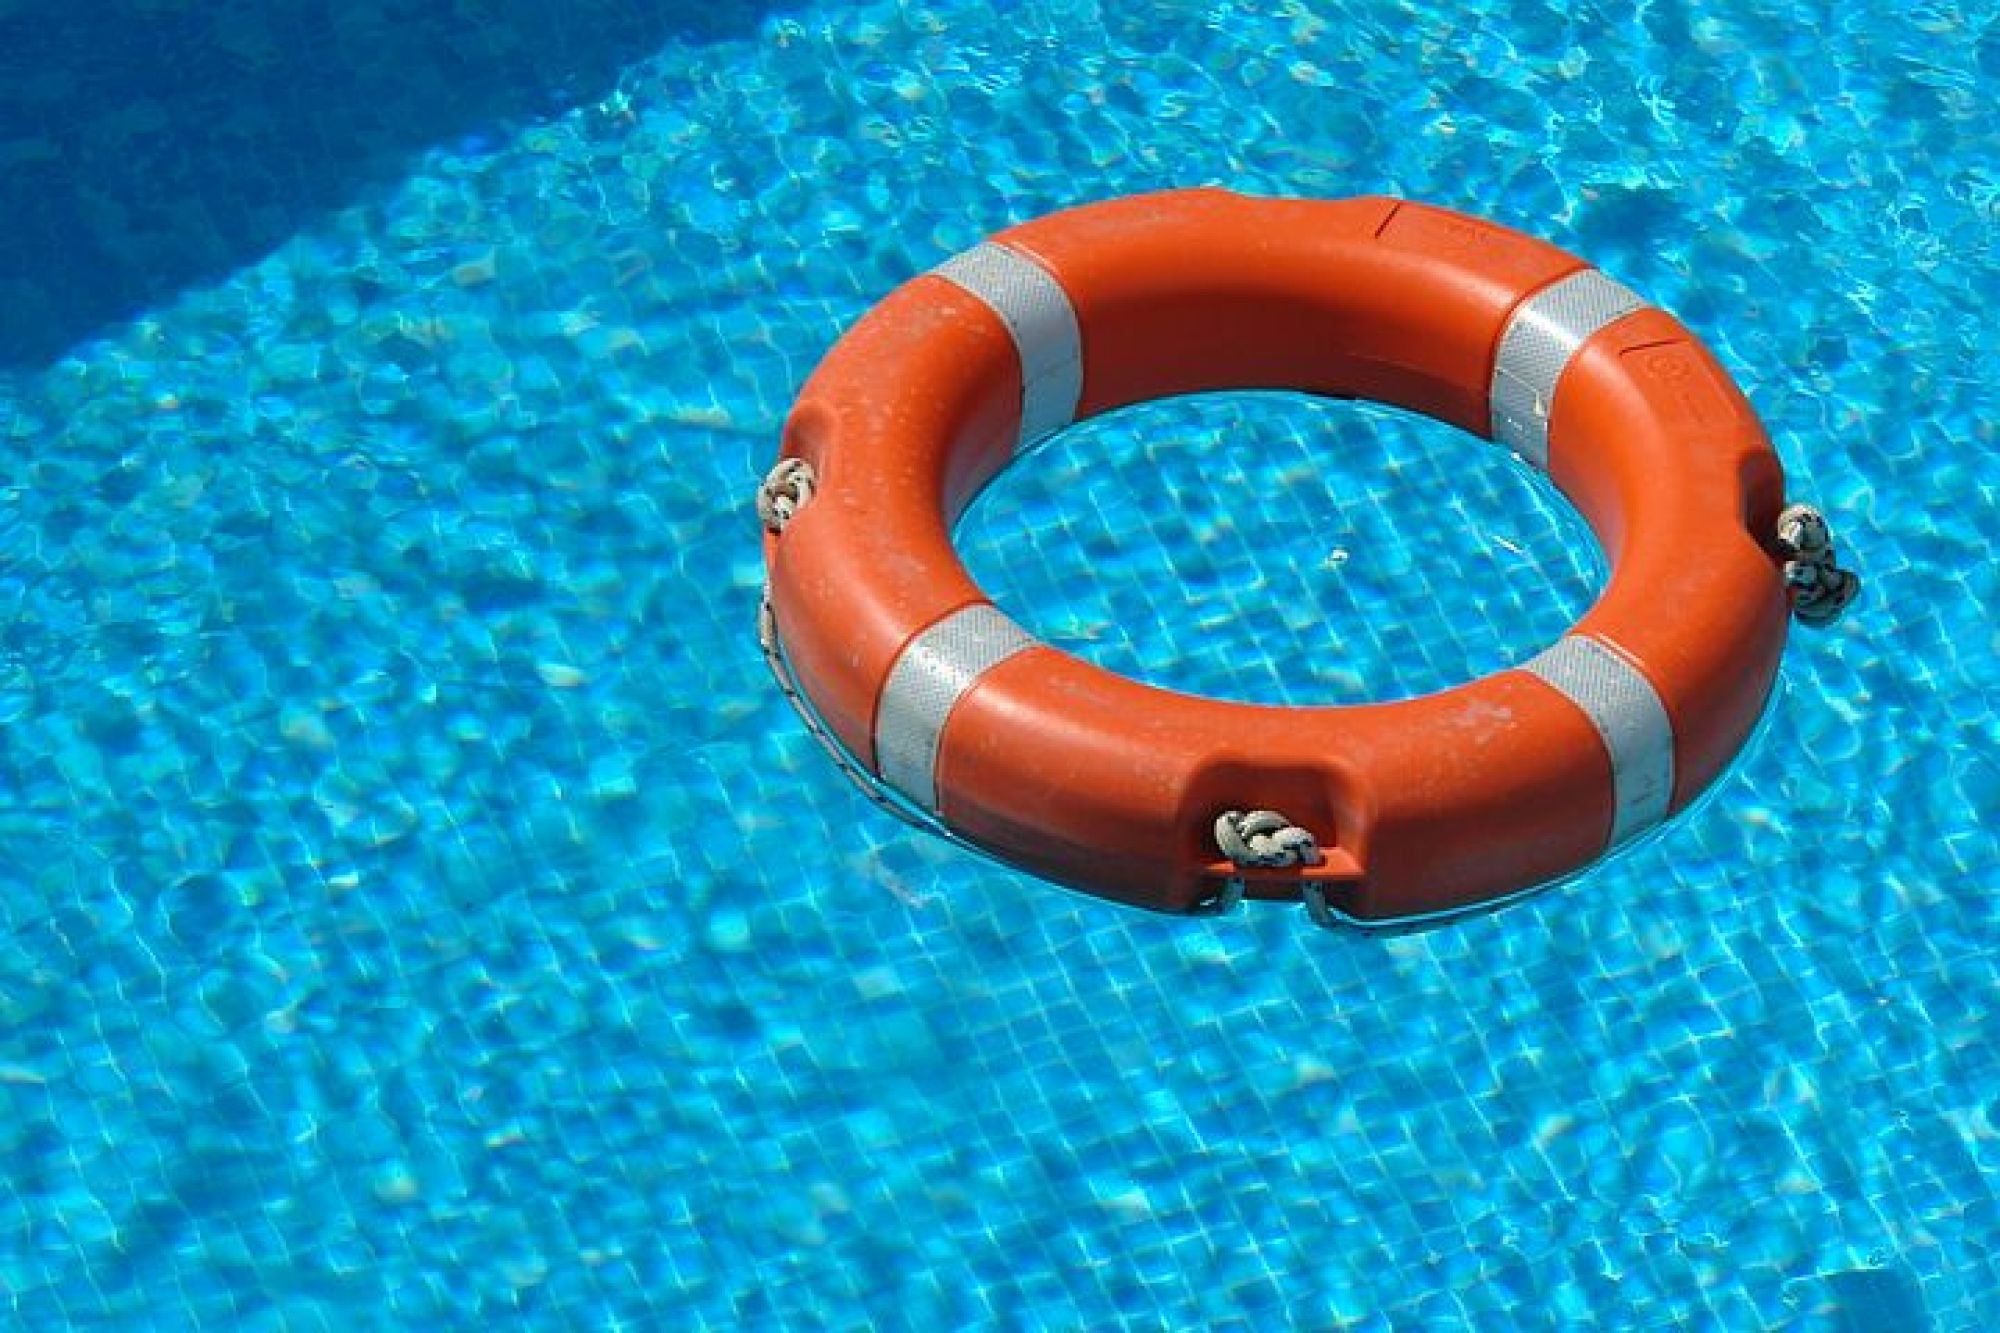 Best Tips for Home Pool Safety